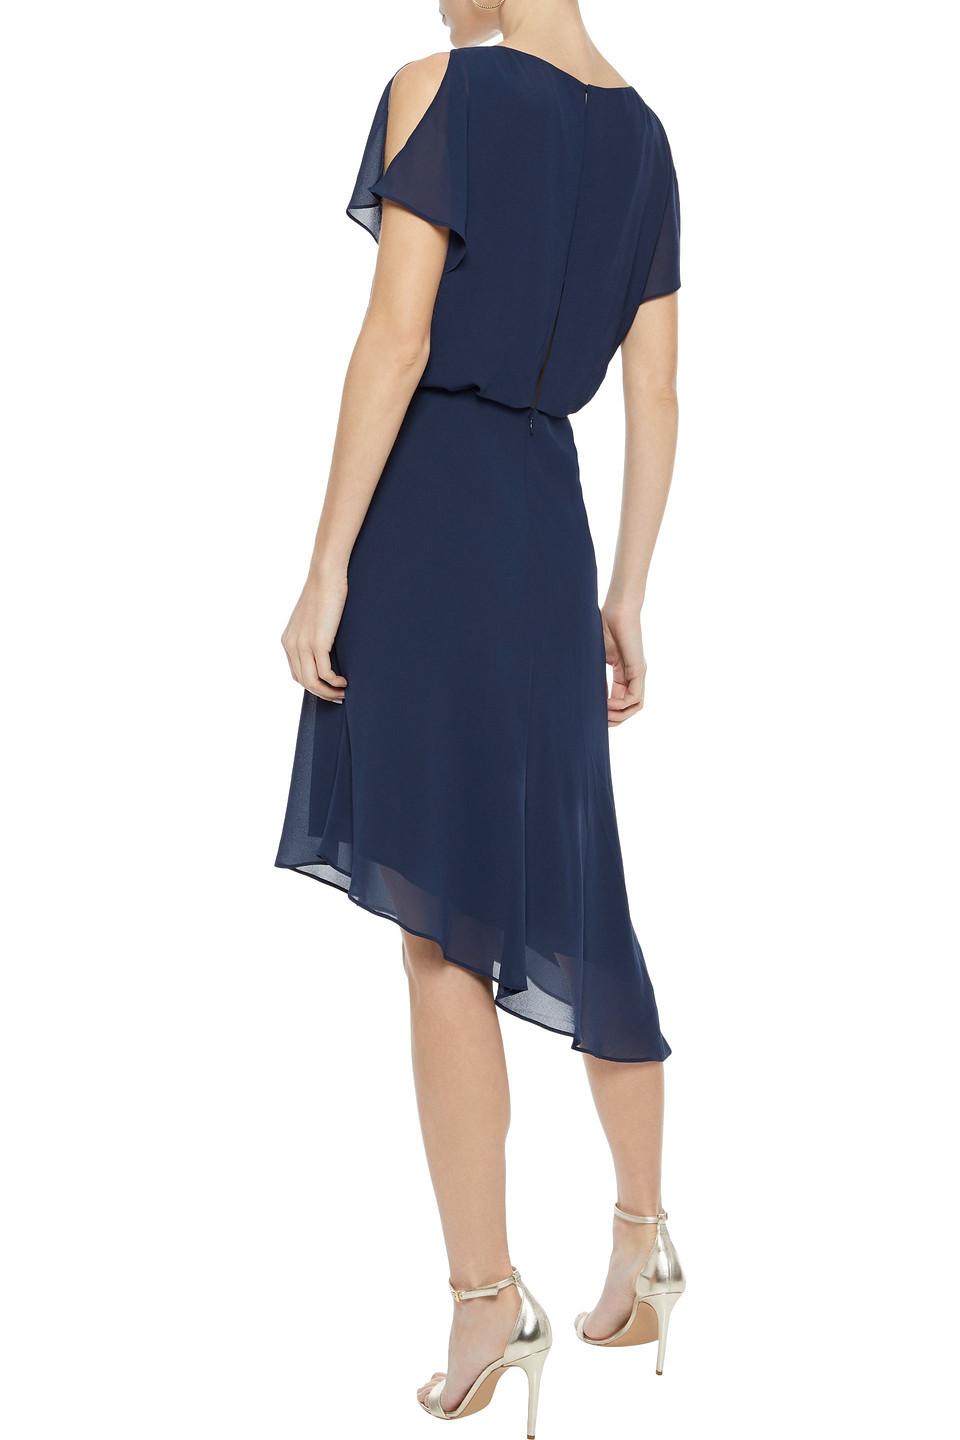 Iris & Ink Synthetic Lily Asymmetric Gathered Crepe Dress Navy in Blue ...